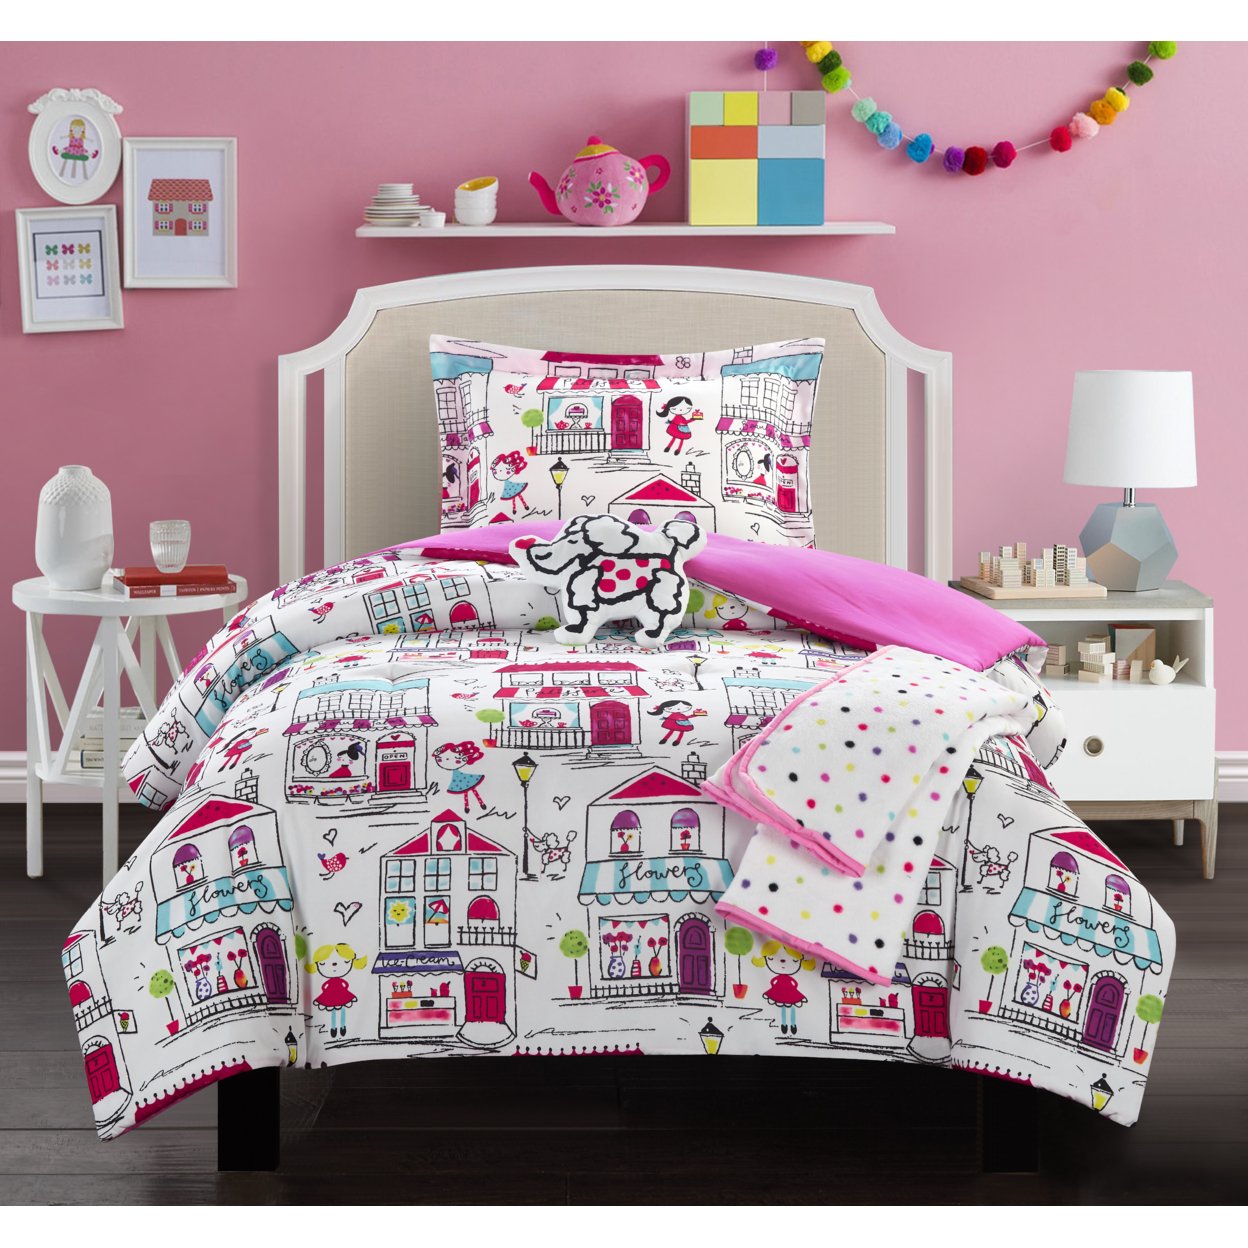 5 Or 4 Piece Comforter Set Youth Design Bedding - Throw Blanket Decorative Pillow Shams Included - Hot Pink, Twin